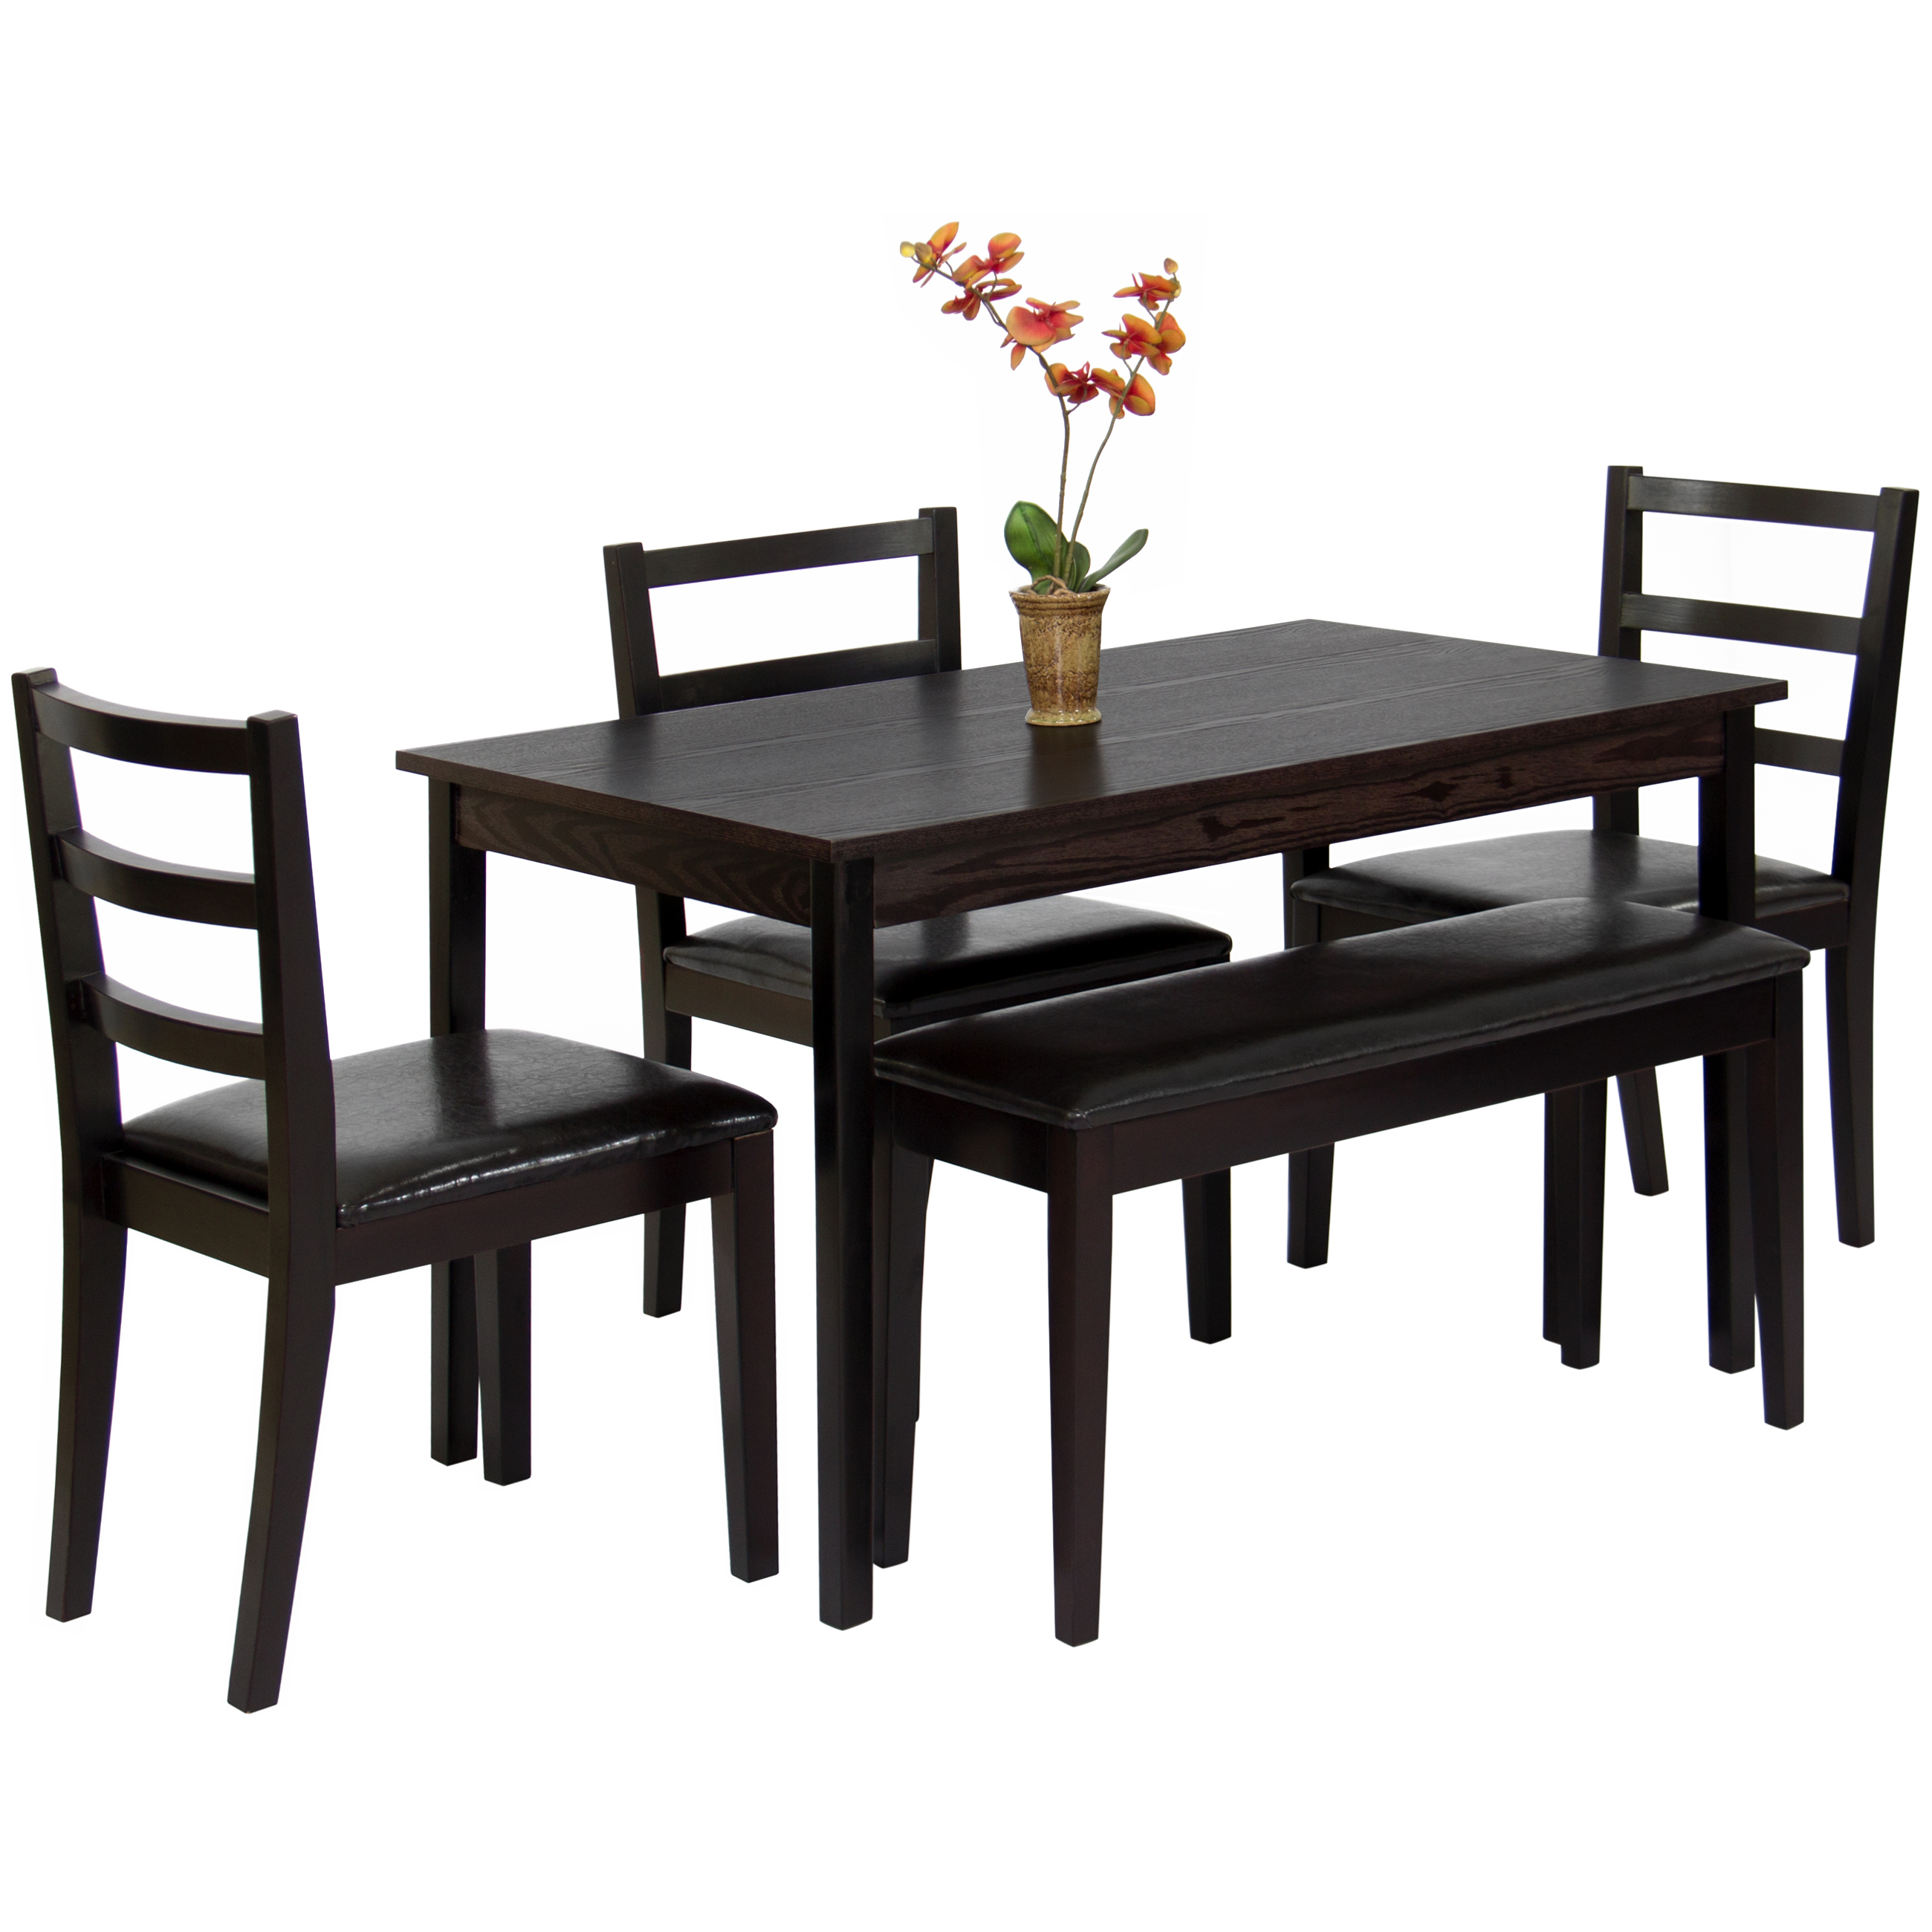 Best Choice Products 5-Piece Wood Dining Table Set w/ Bench, 3 Chairs